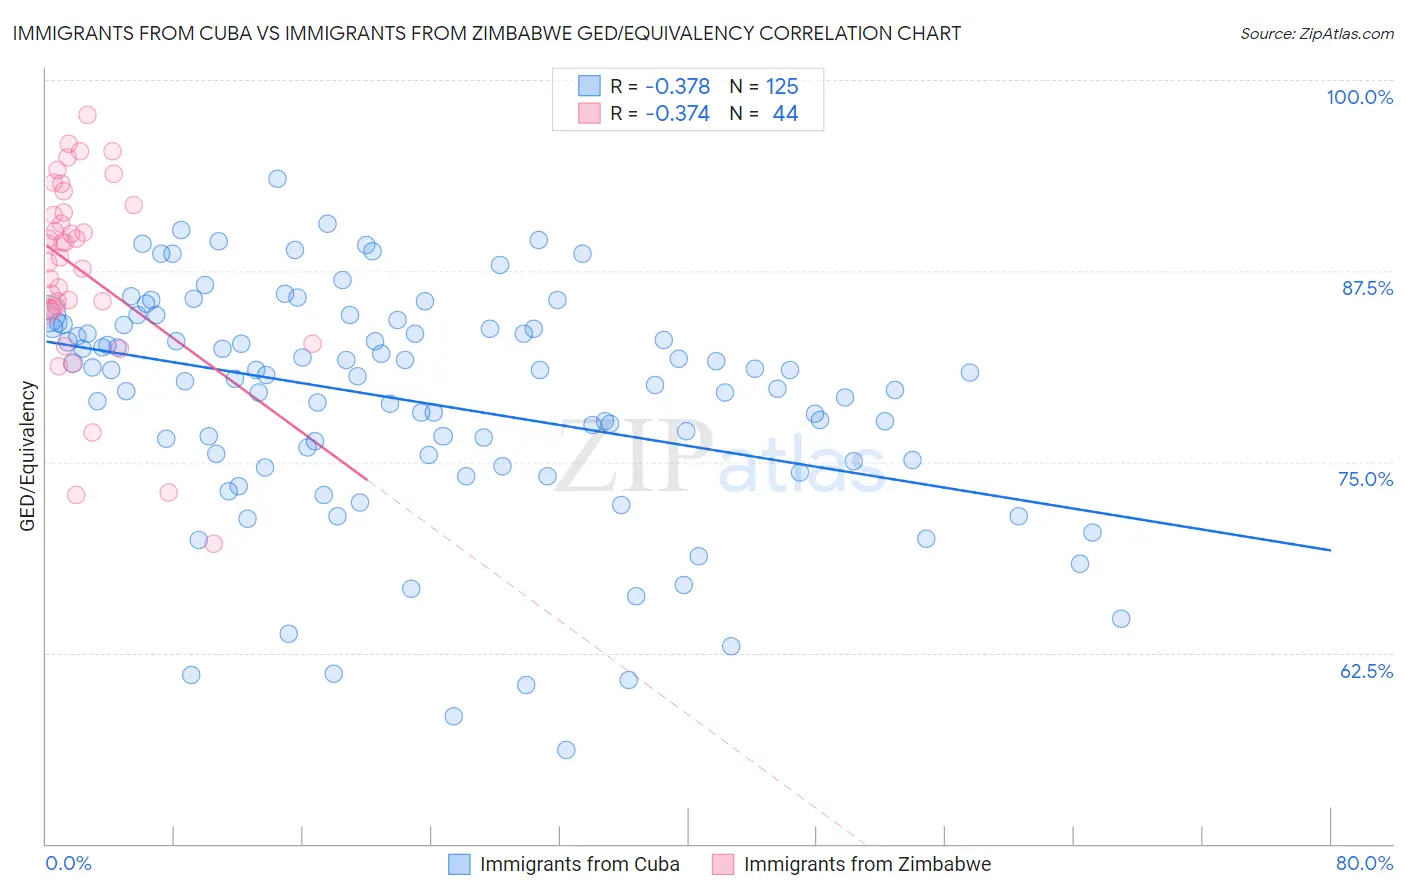 Immigrants from Cuba vs Immigrants from Zimbabwe GED/Equivalency